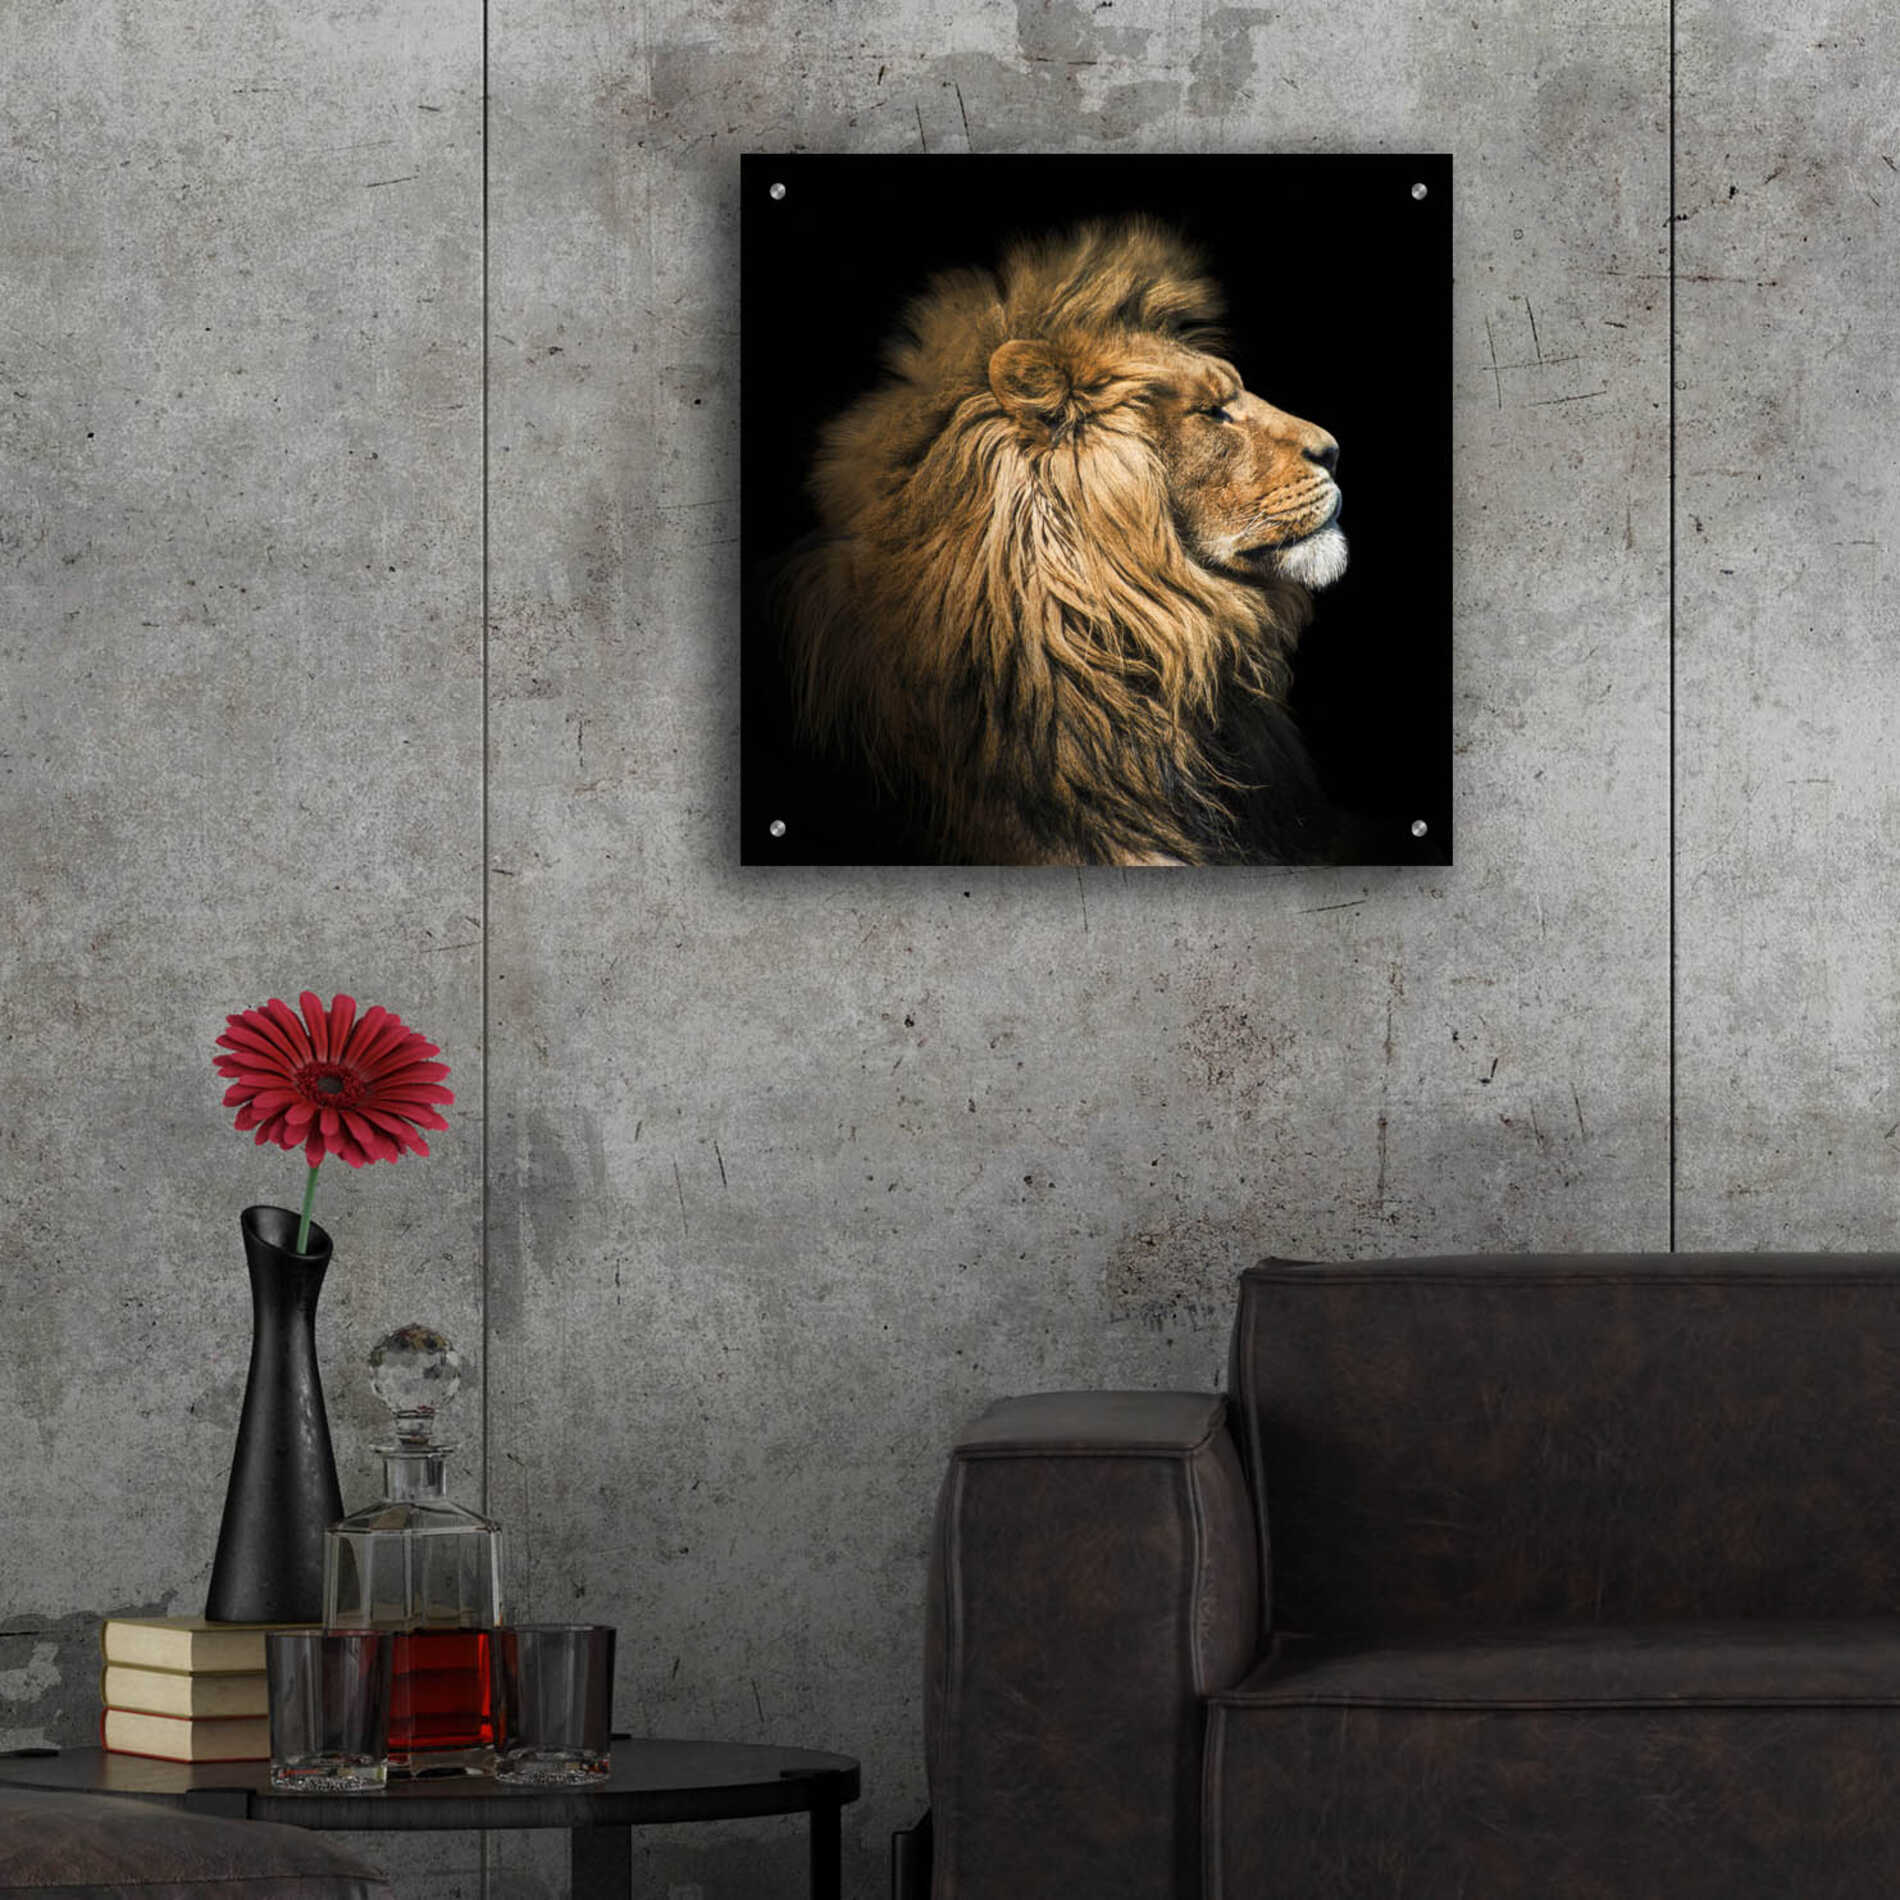 Epic Art 'The King Of The Jungle' by Epic Portfolio Acrylic Glass Wall Art,24x24